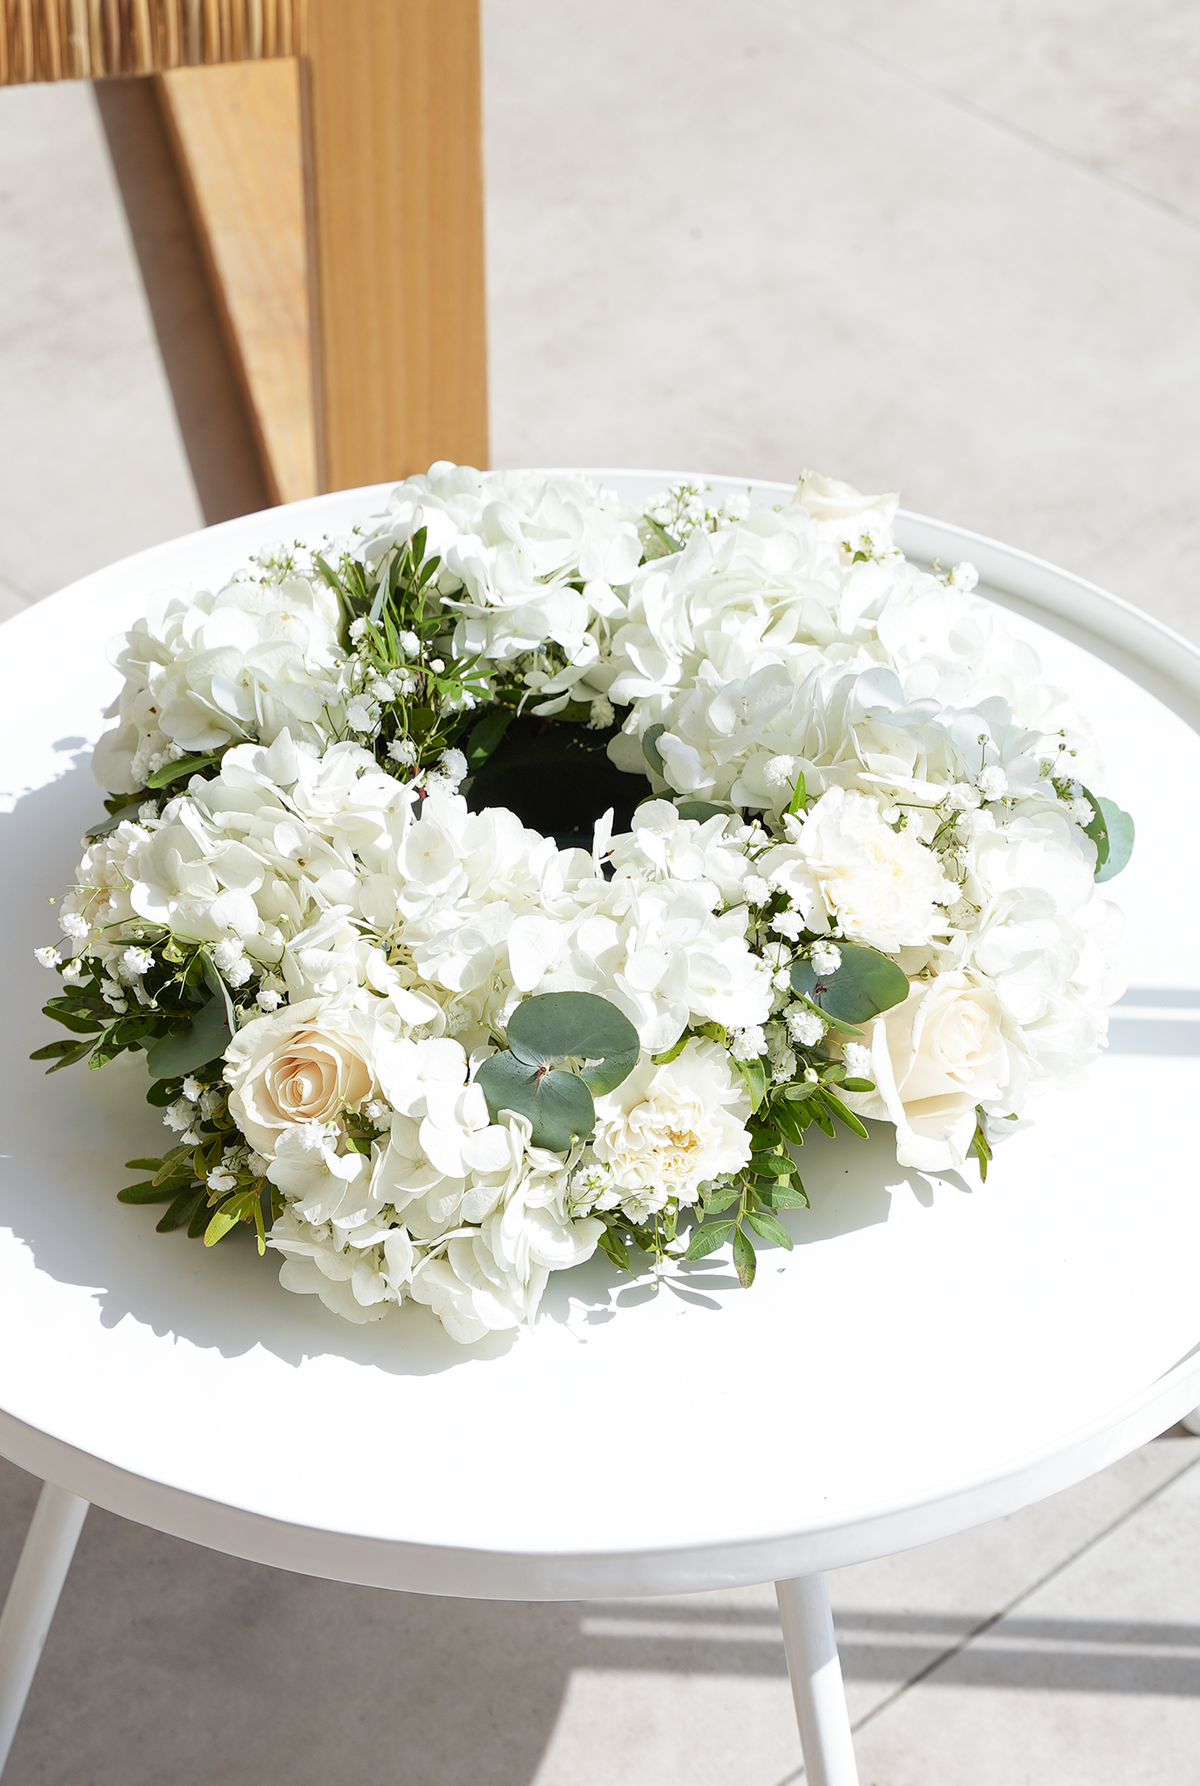 Perfect White Funeral Wreath